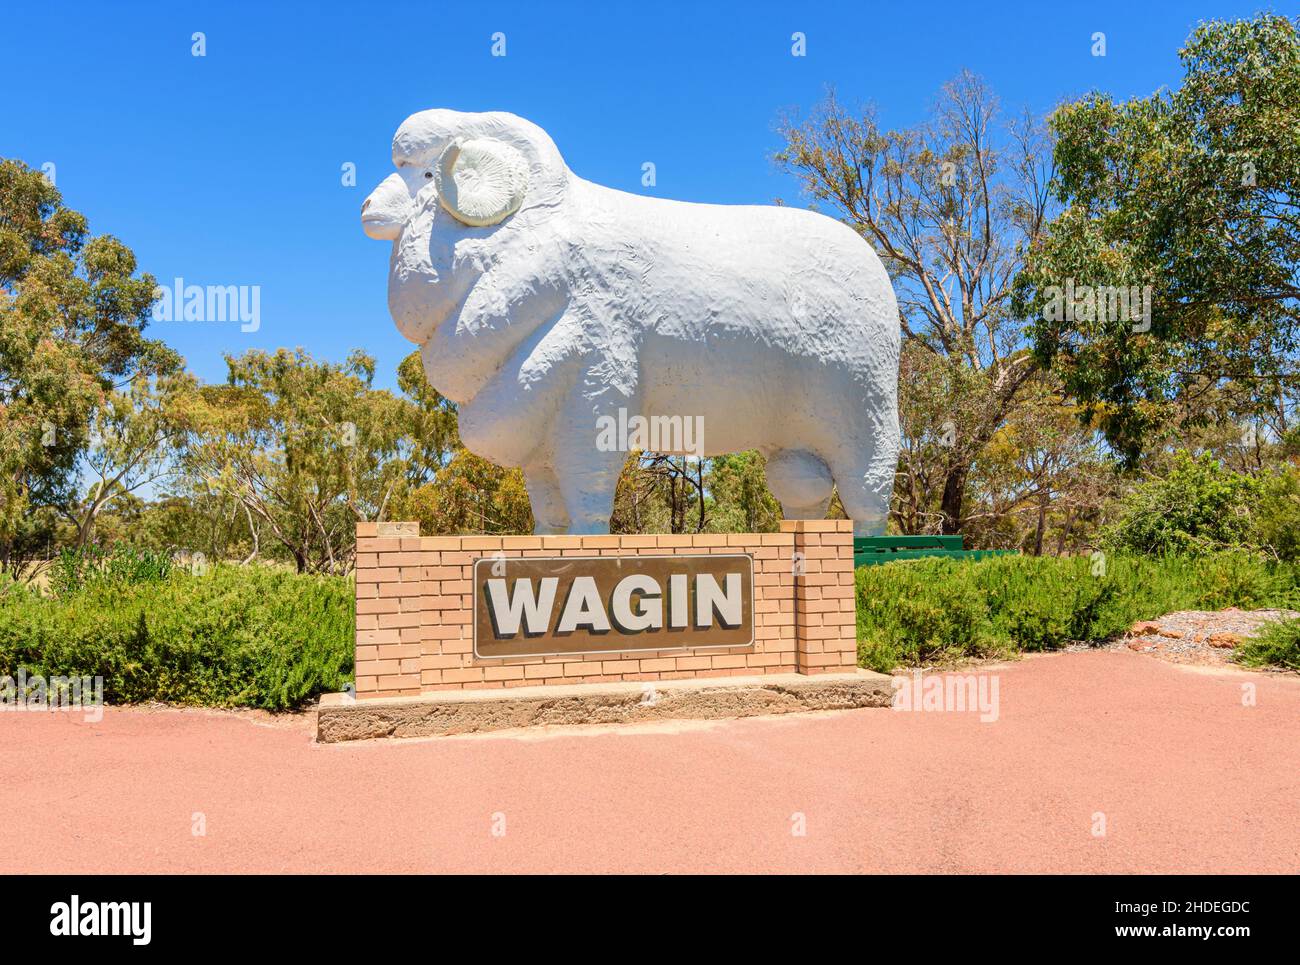 The Big Ram at the Giant Ram Tourist Park in the country town of Wagin, Western Australia, Australia Stock Photo